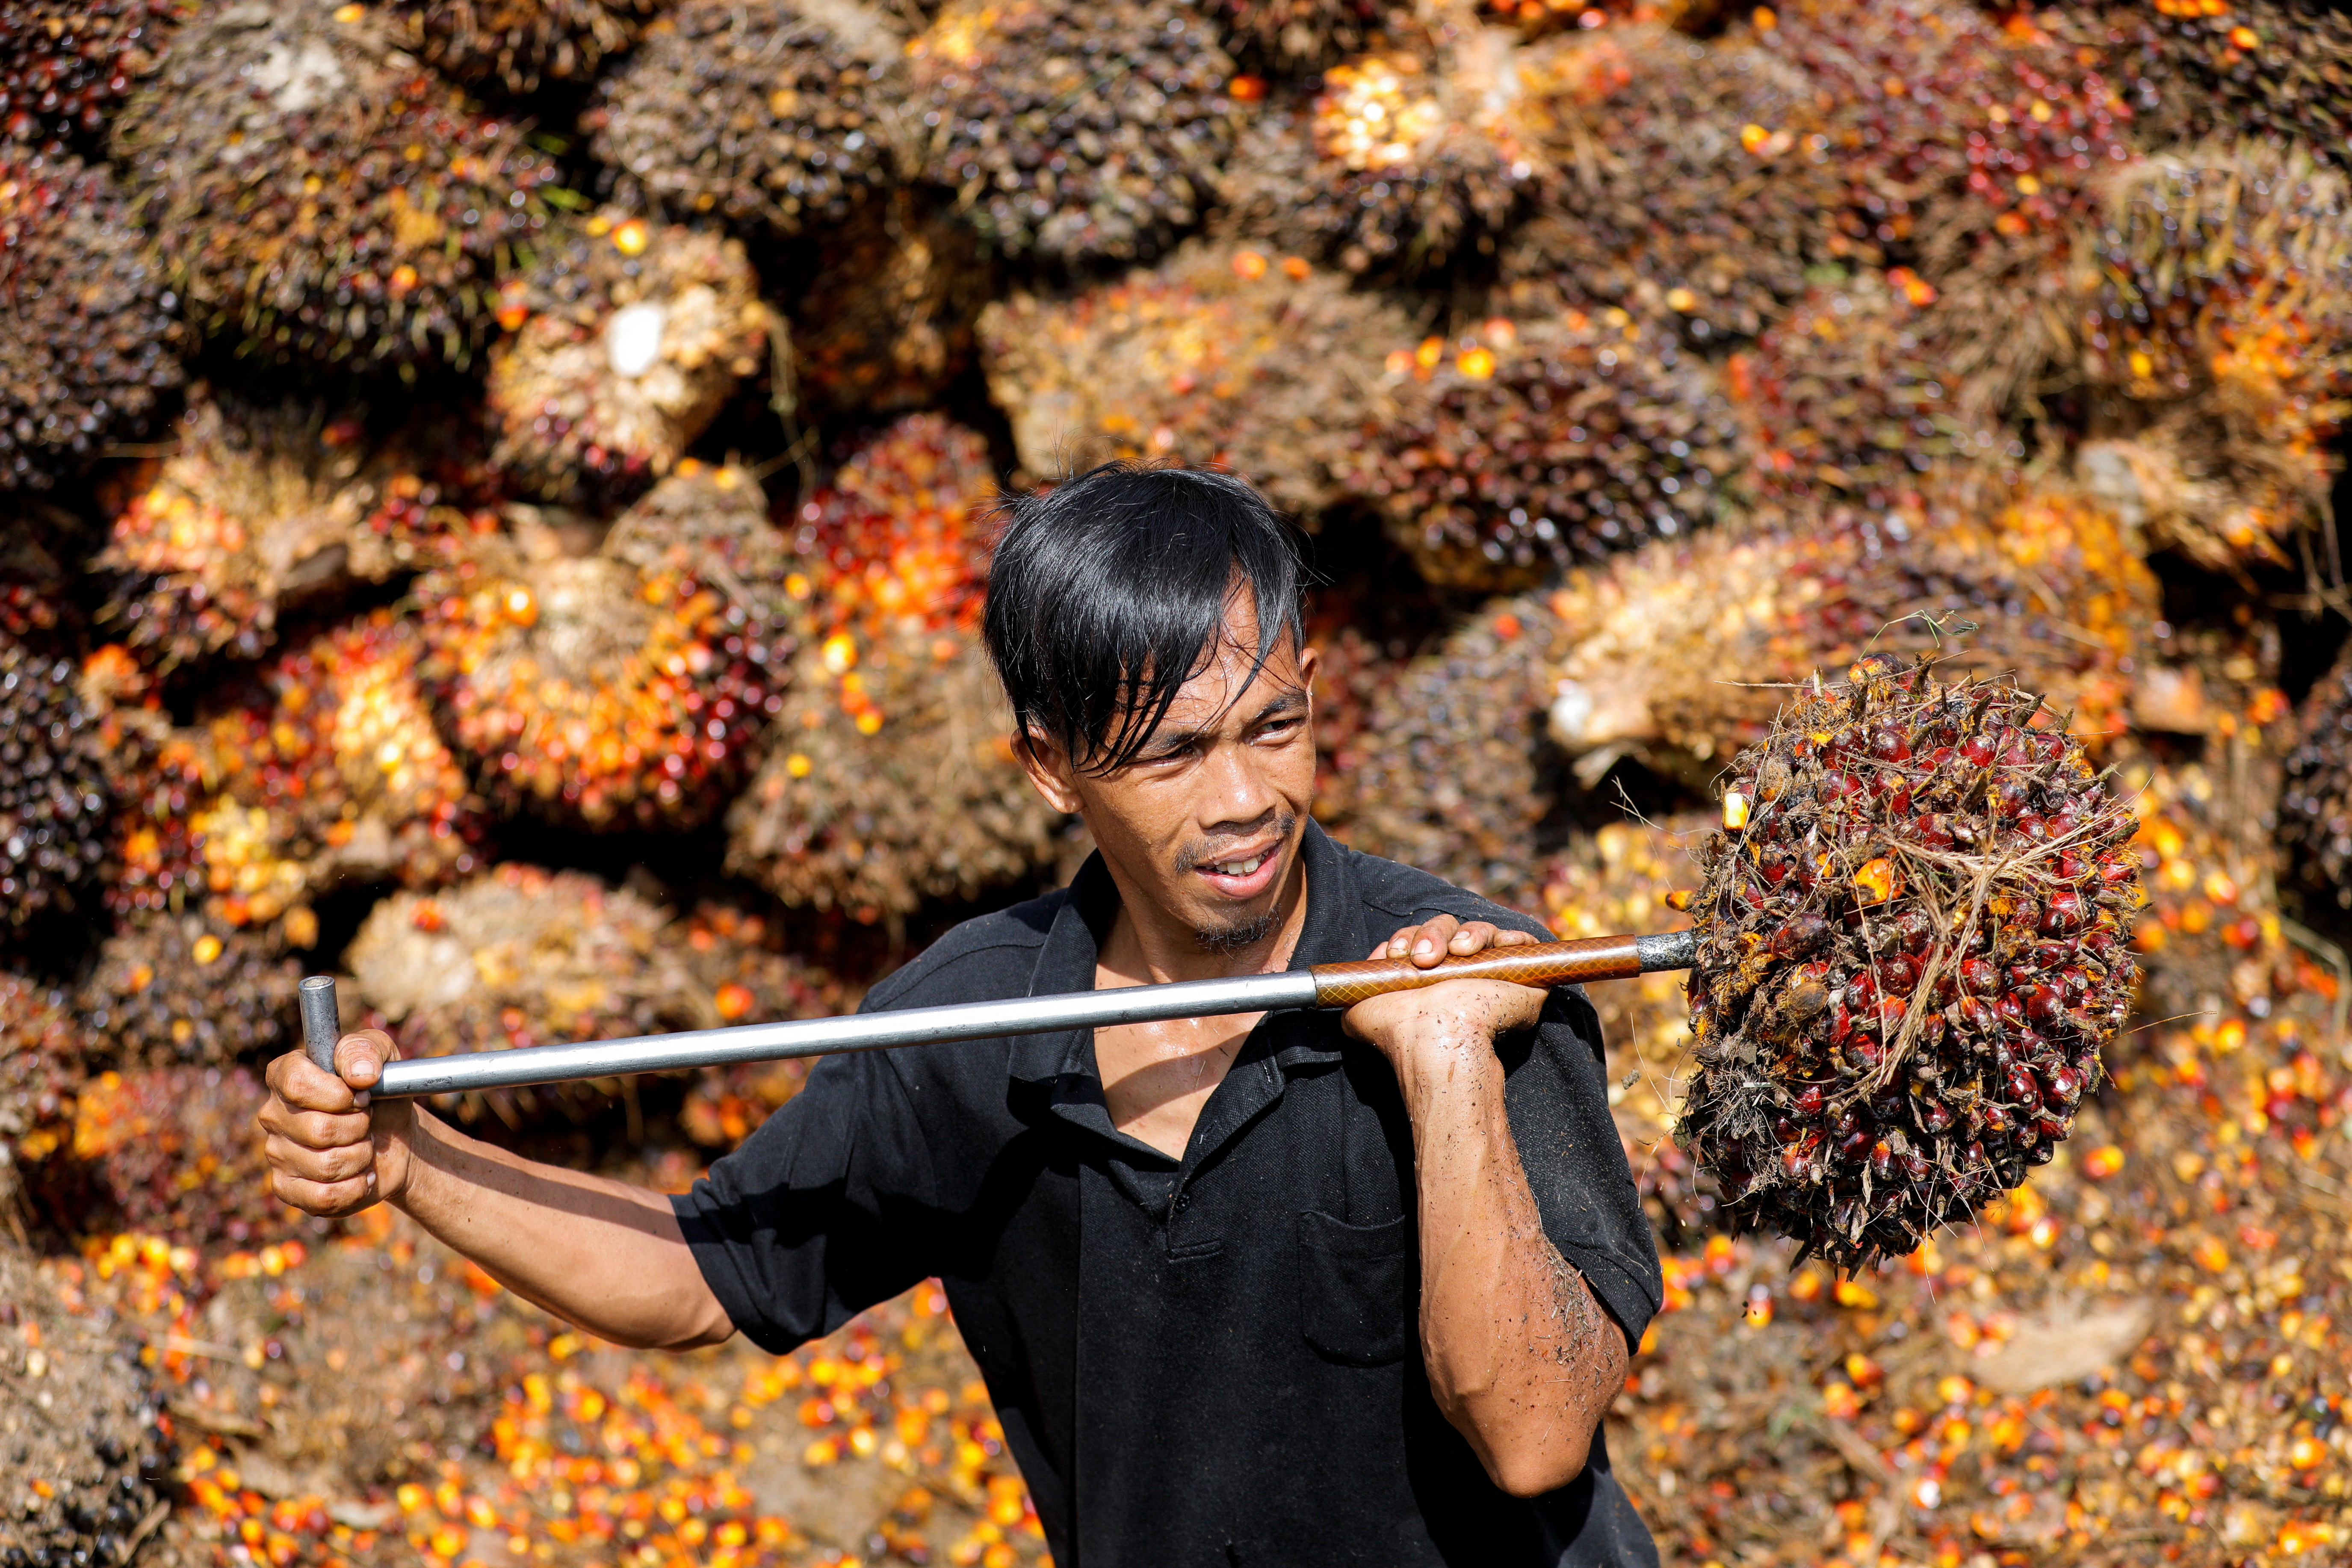 Palm oil plantation in Riau province as Indonesia has announced the ban on palm oil exports effective this week